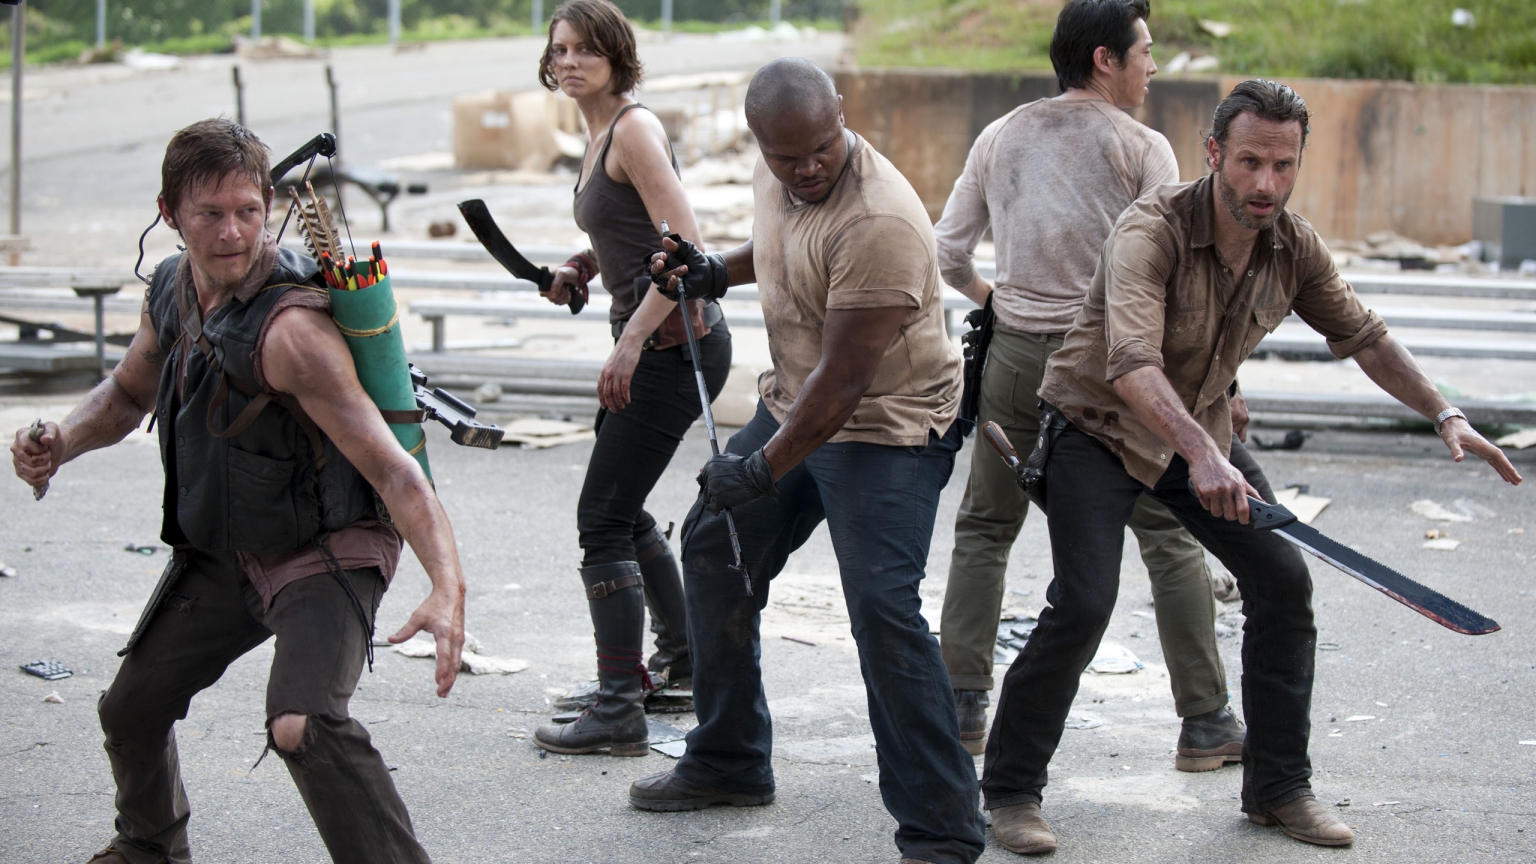 The Walking Dead Cast for 1536 x 864 HDTV resolution